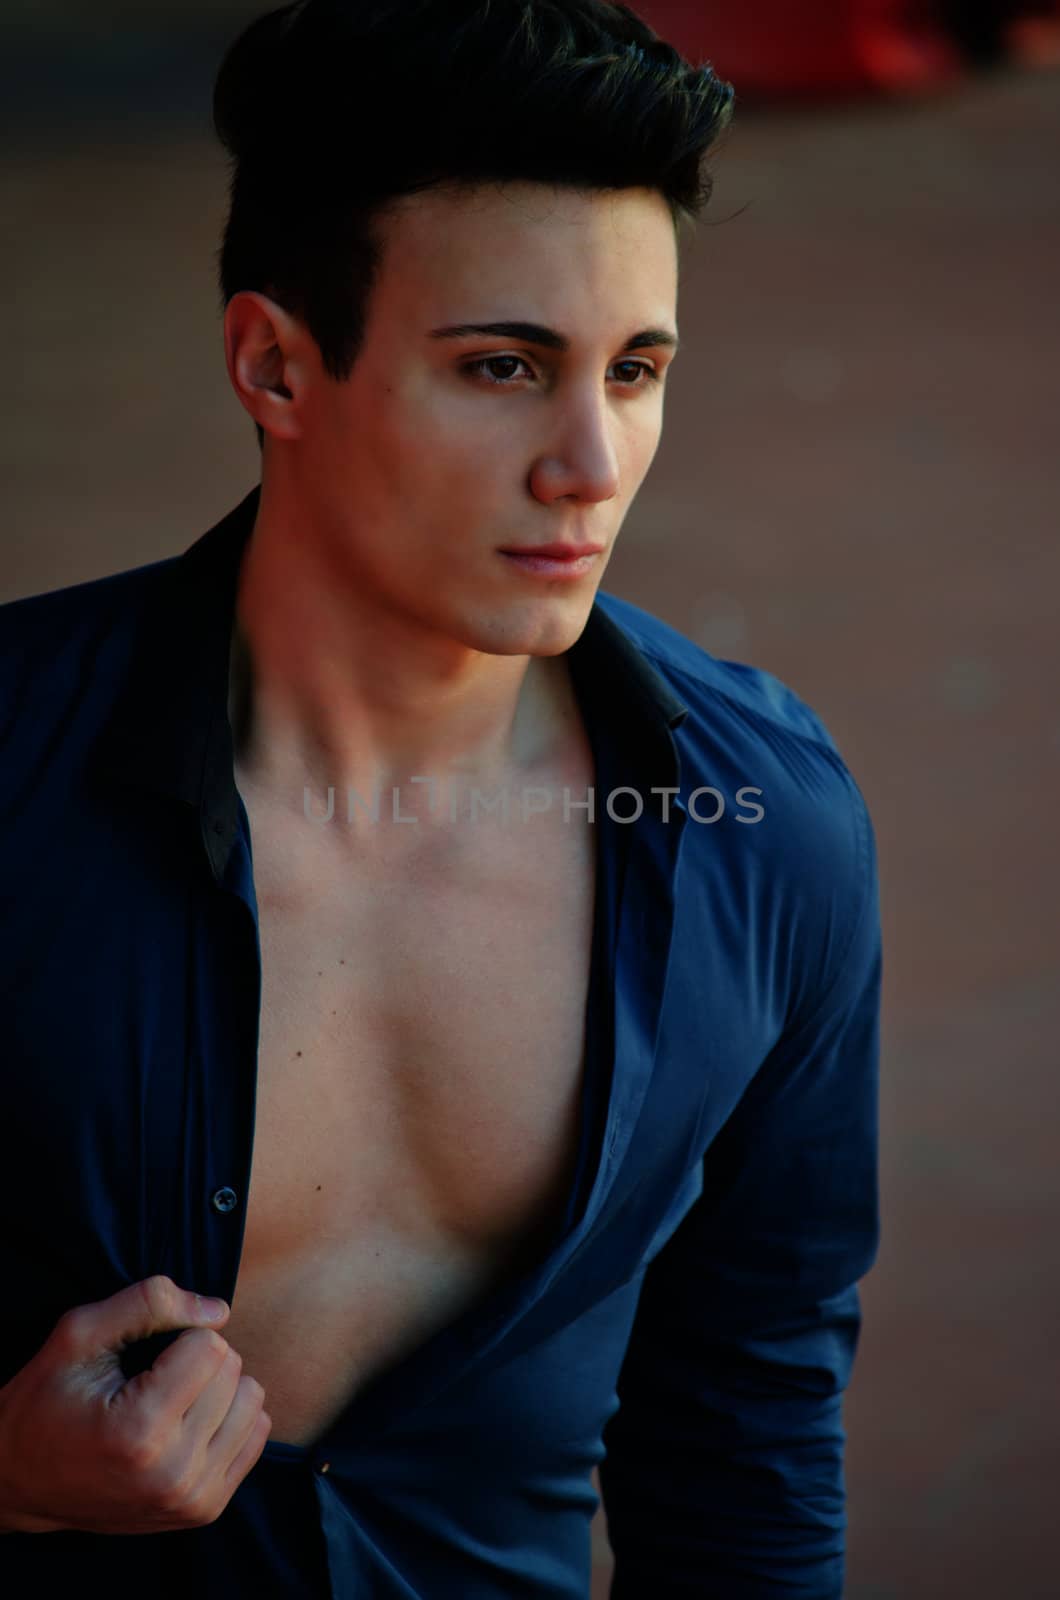 Handsome young man standing with open shirt showing torso by artofphoto